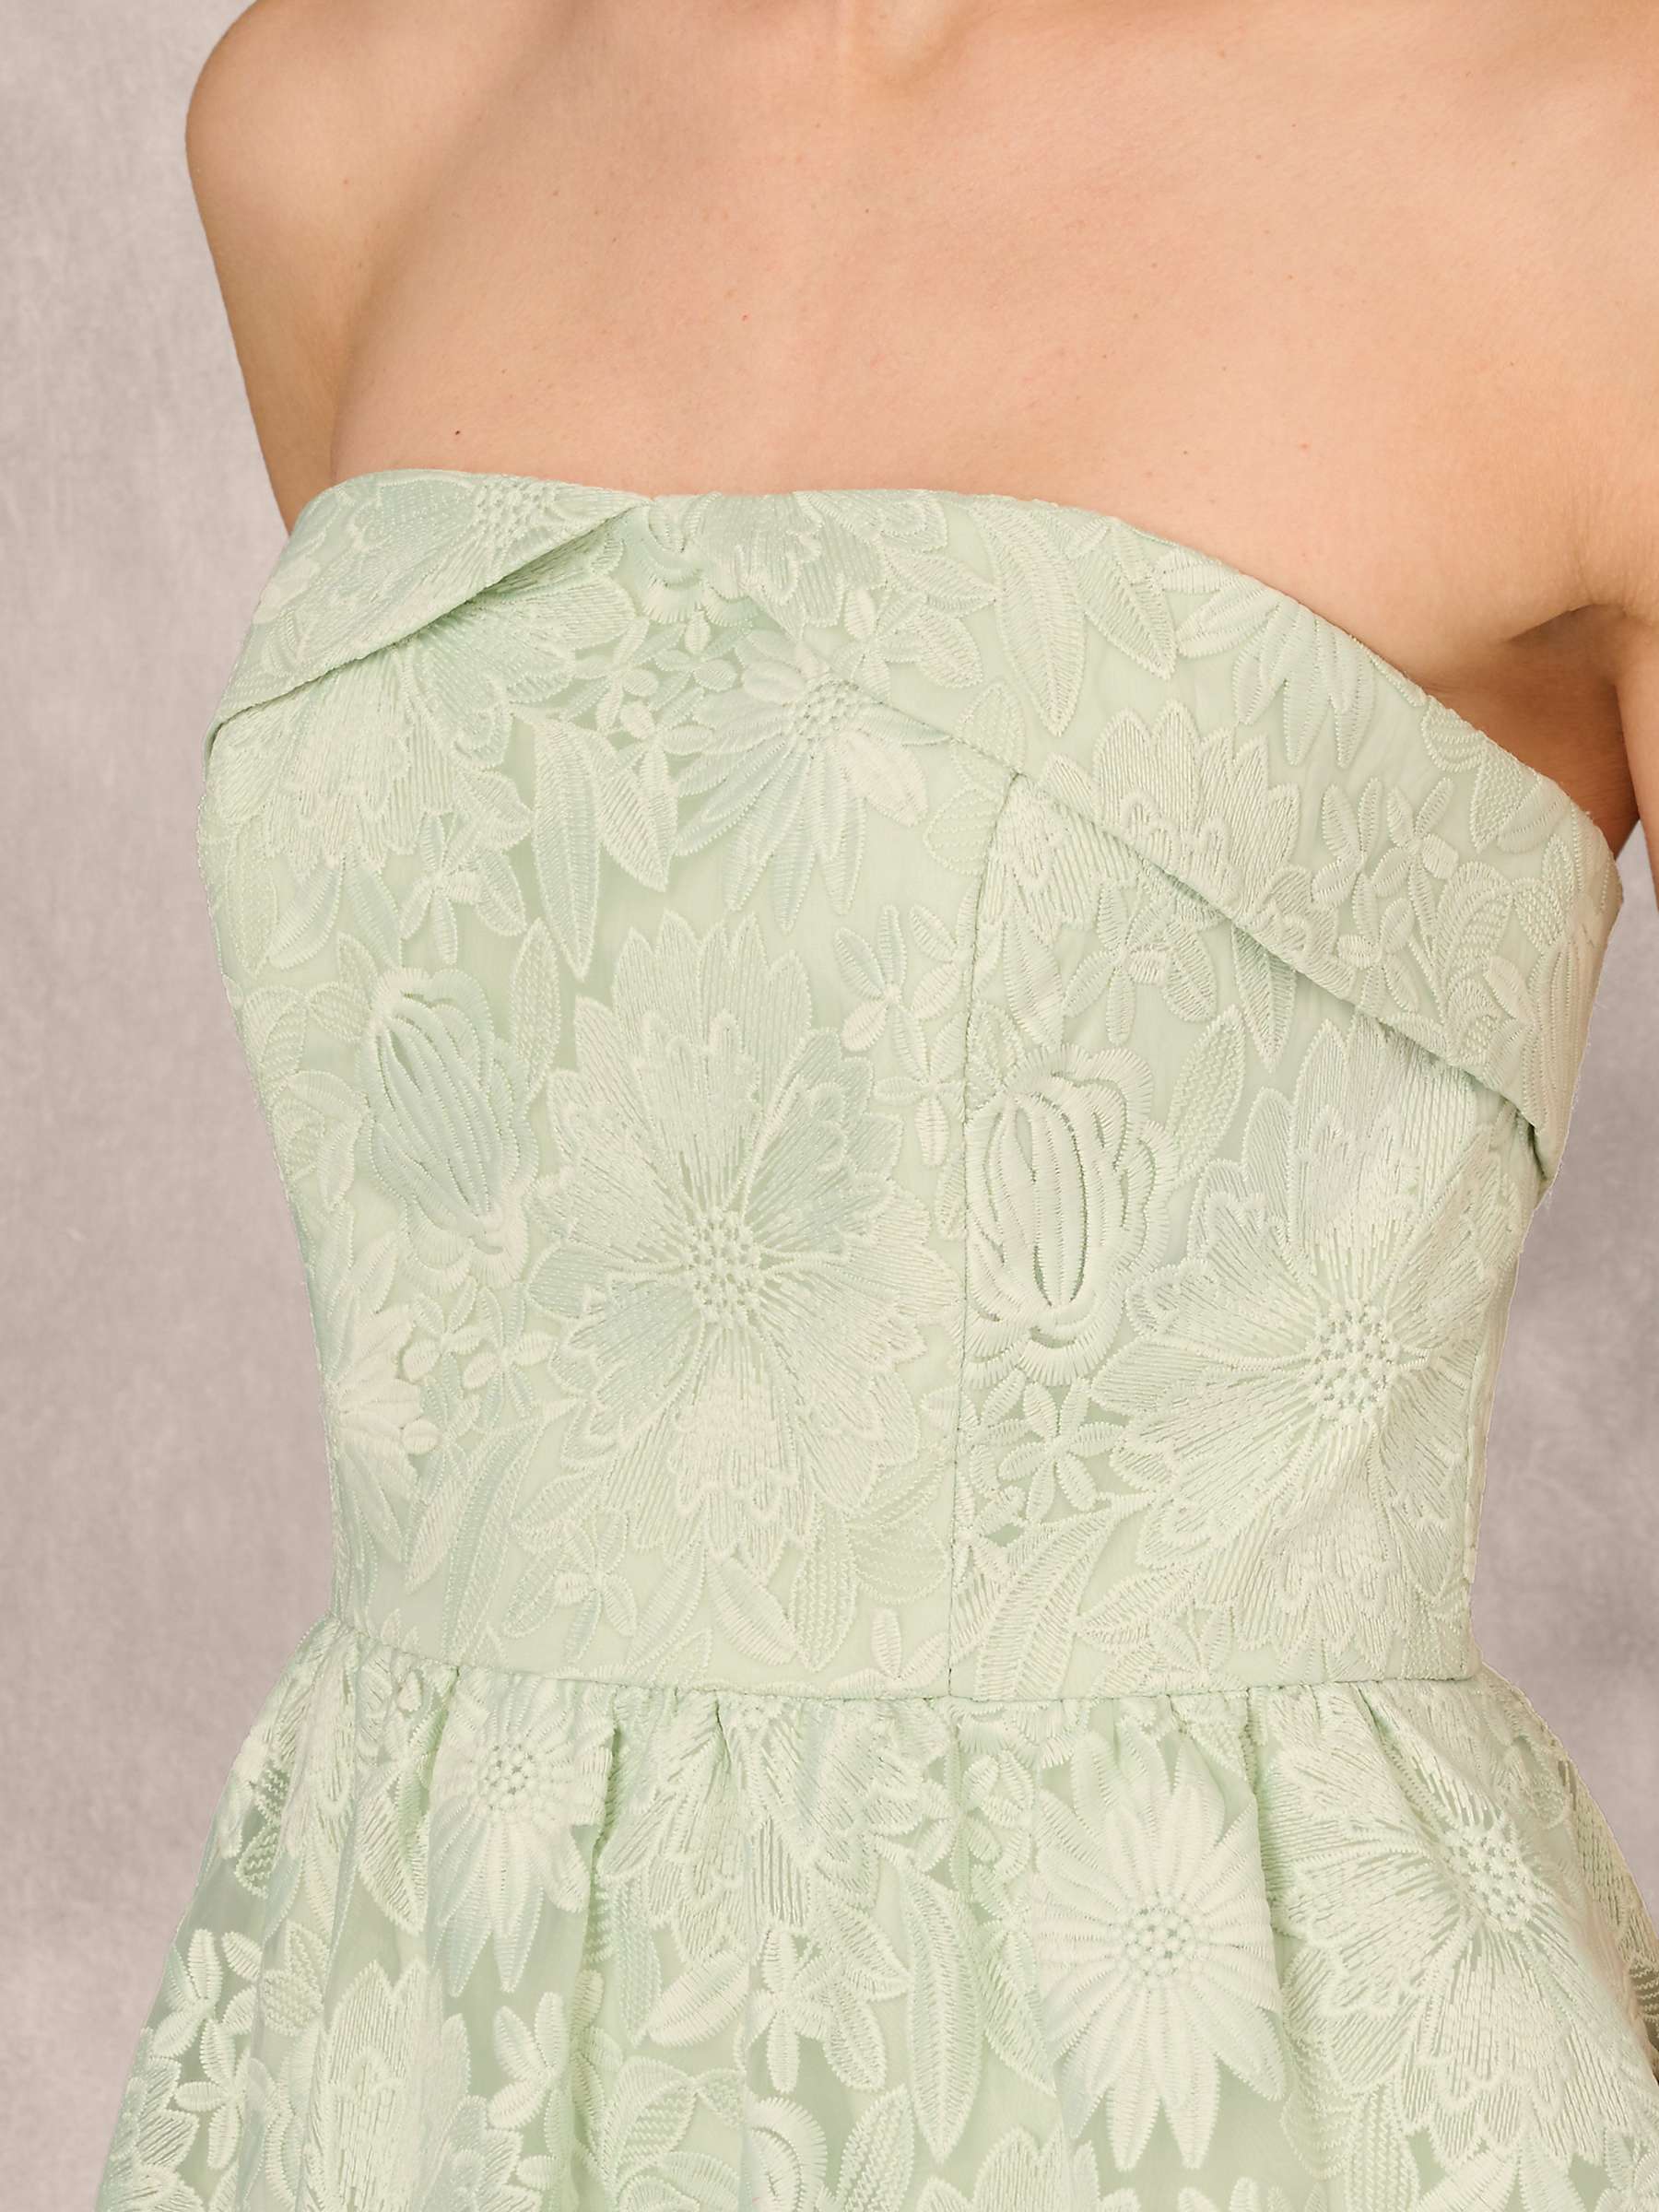 Buy Adrianna Papell Floral Embroidered Organza Midi Dress, Mint Online at johnlewis.com